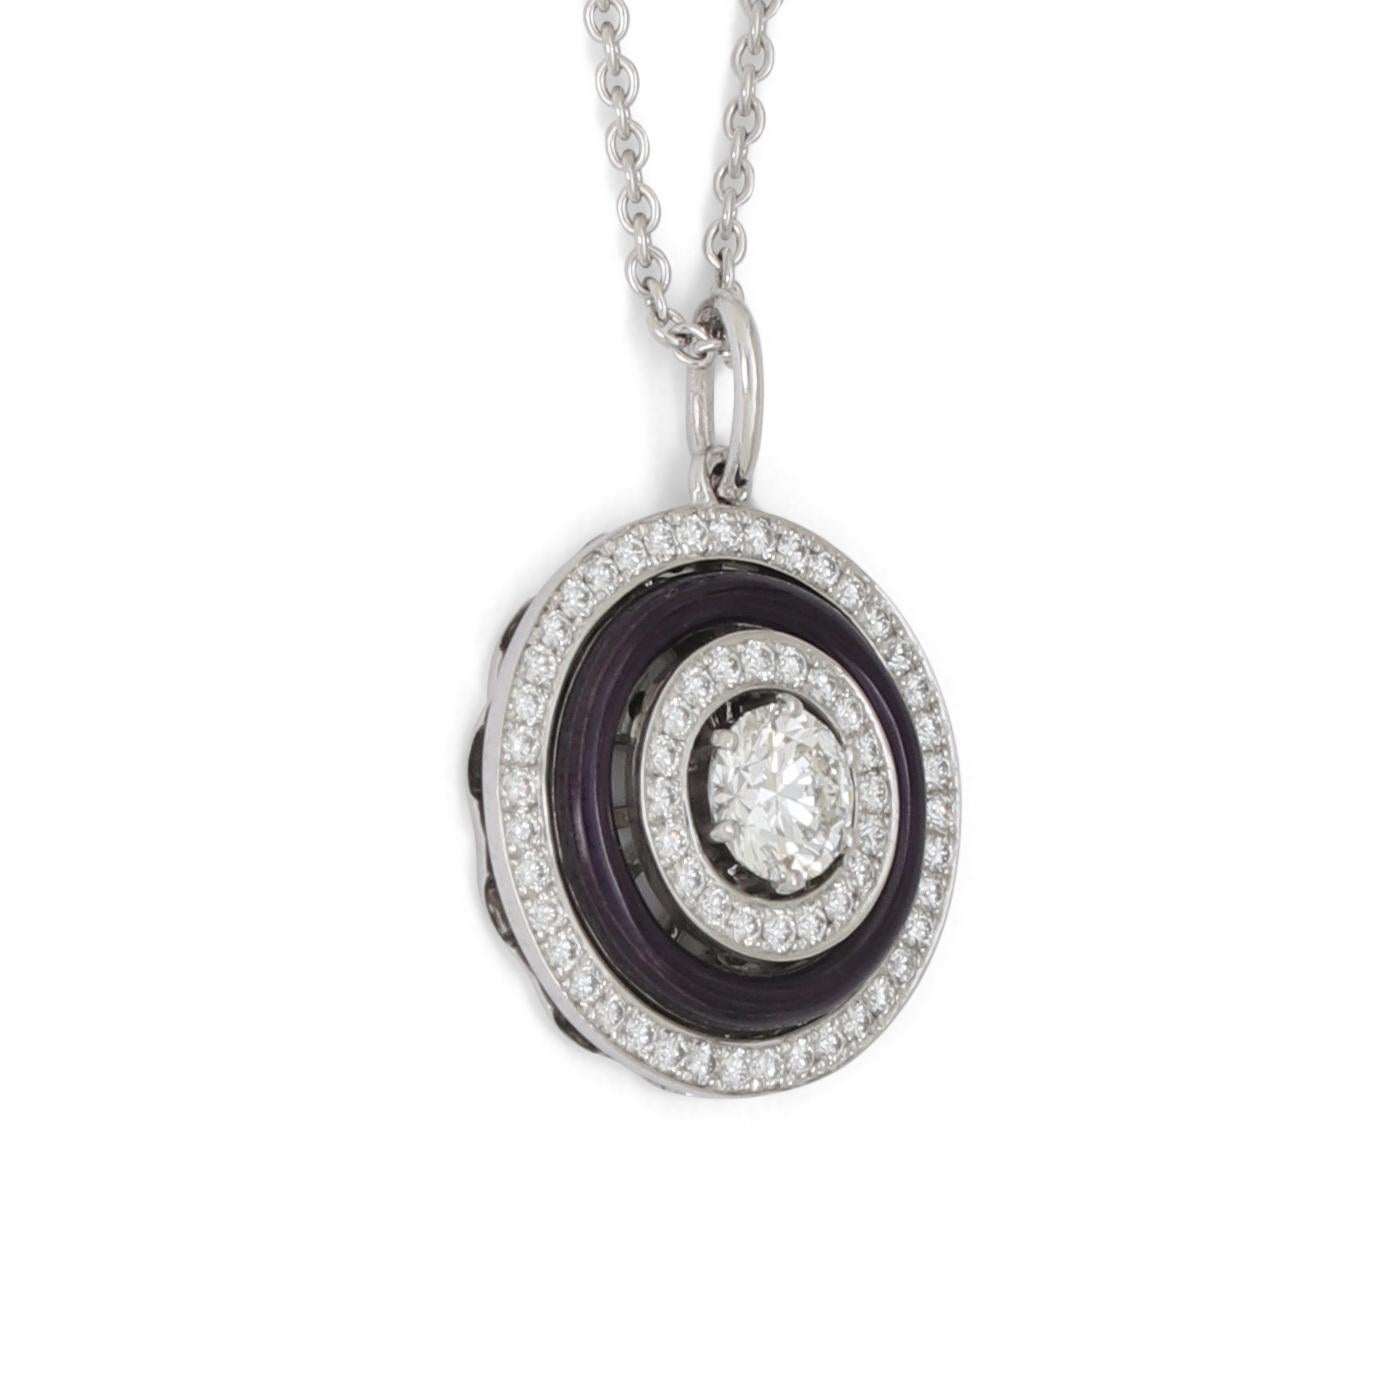 Victor Mayer round pendant 18k white and yellow gold, Soirée Collection, translucent purple vitreous enamel, 69 diamonds, total 1.27 ct, G VS, brilliant cut - included is a 0.51 ct TW VS brilliant cut solitaire with GIA certificate, diameter app.